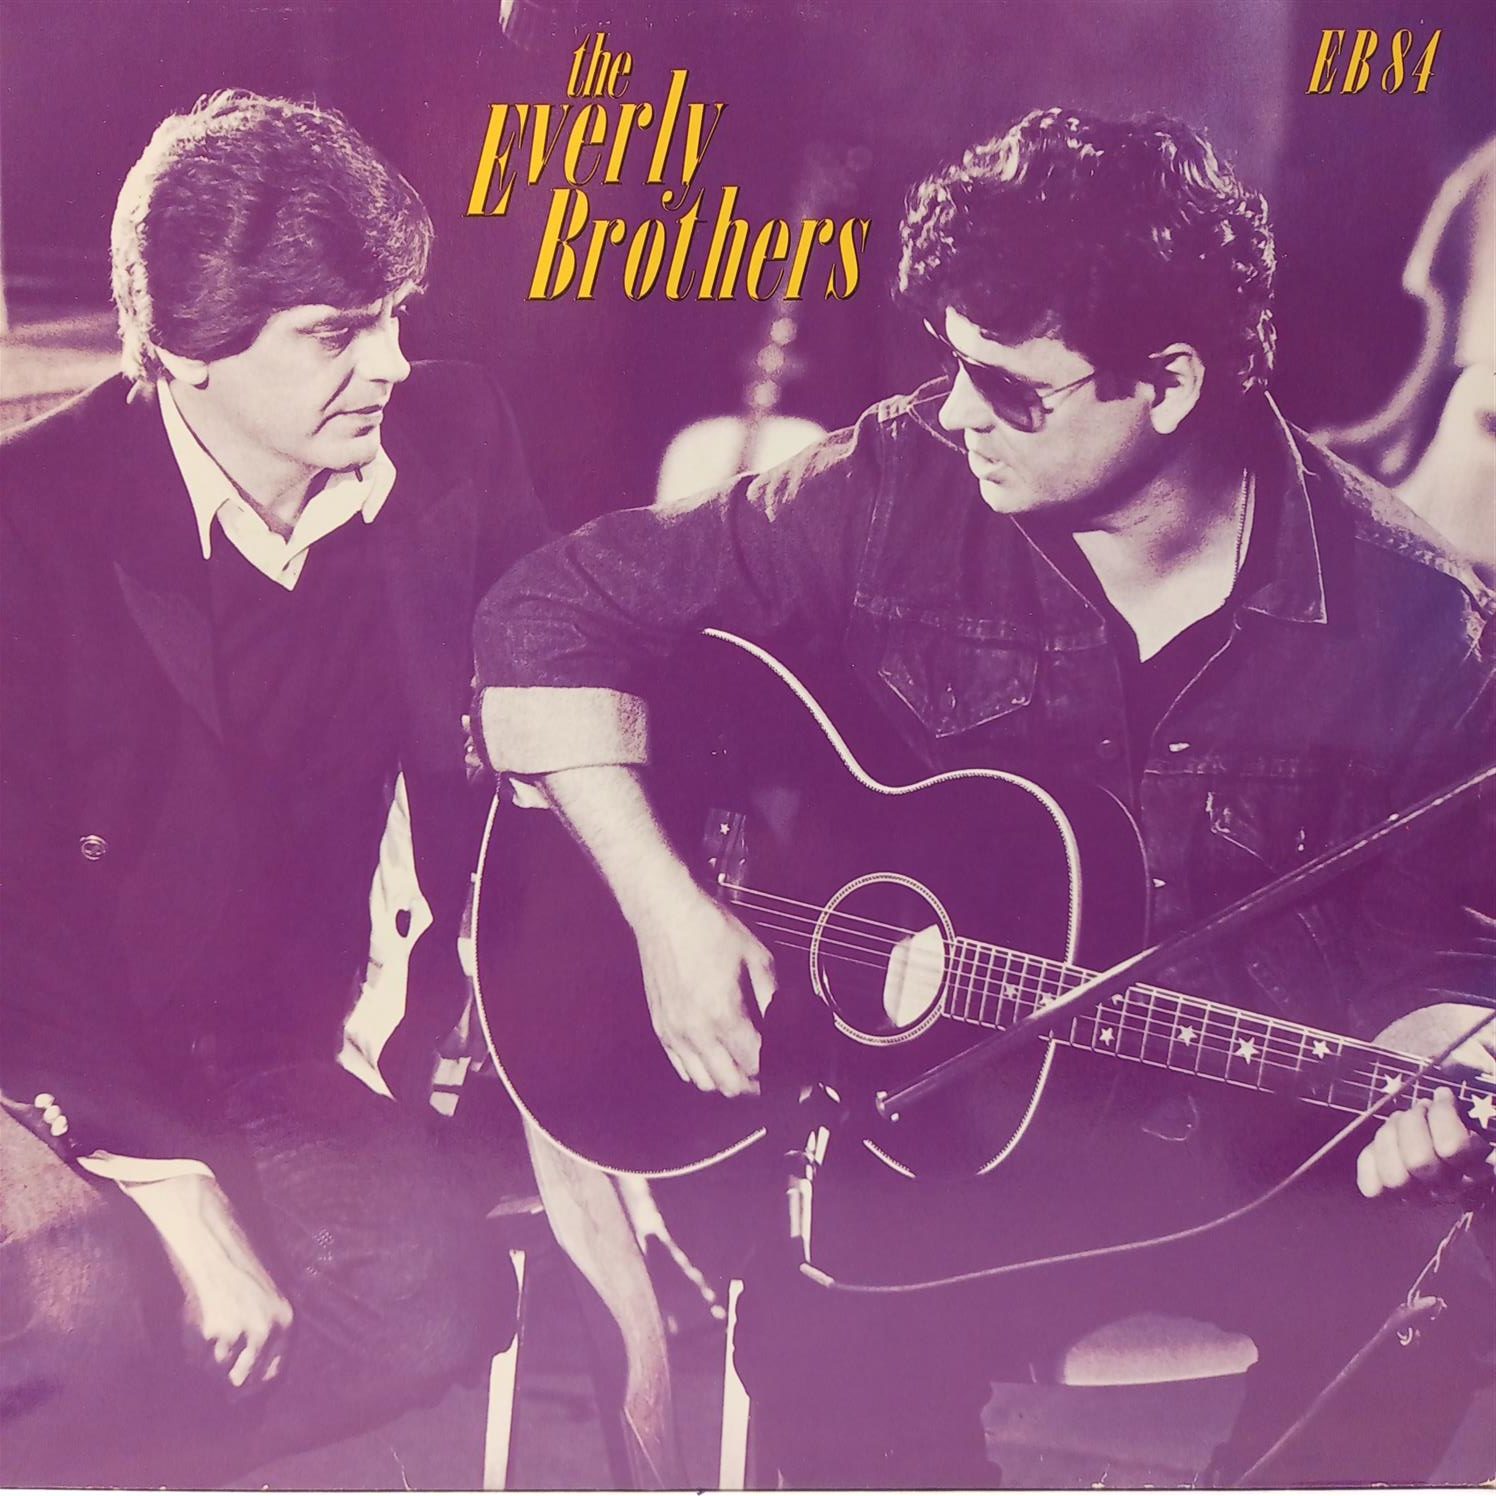 EVERLY BROTHERS – EB84 ON